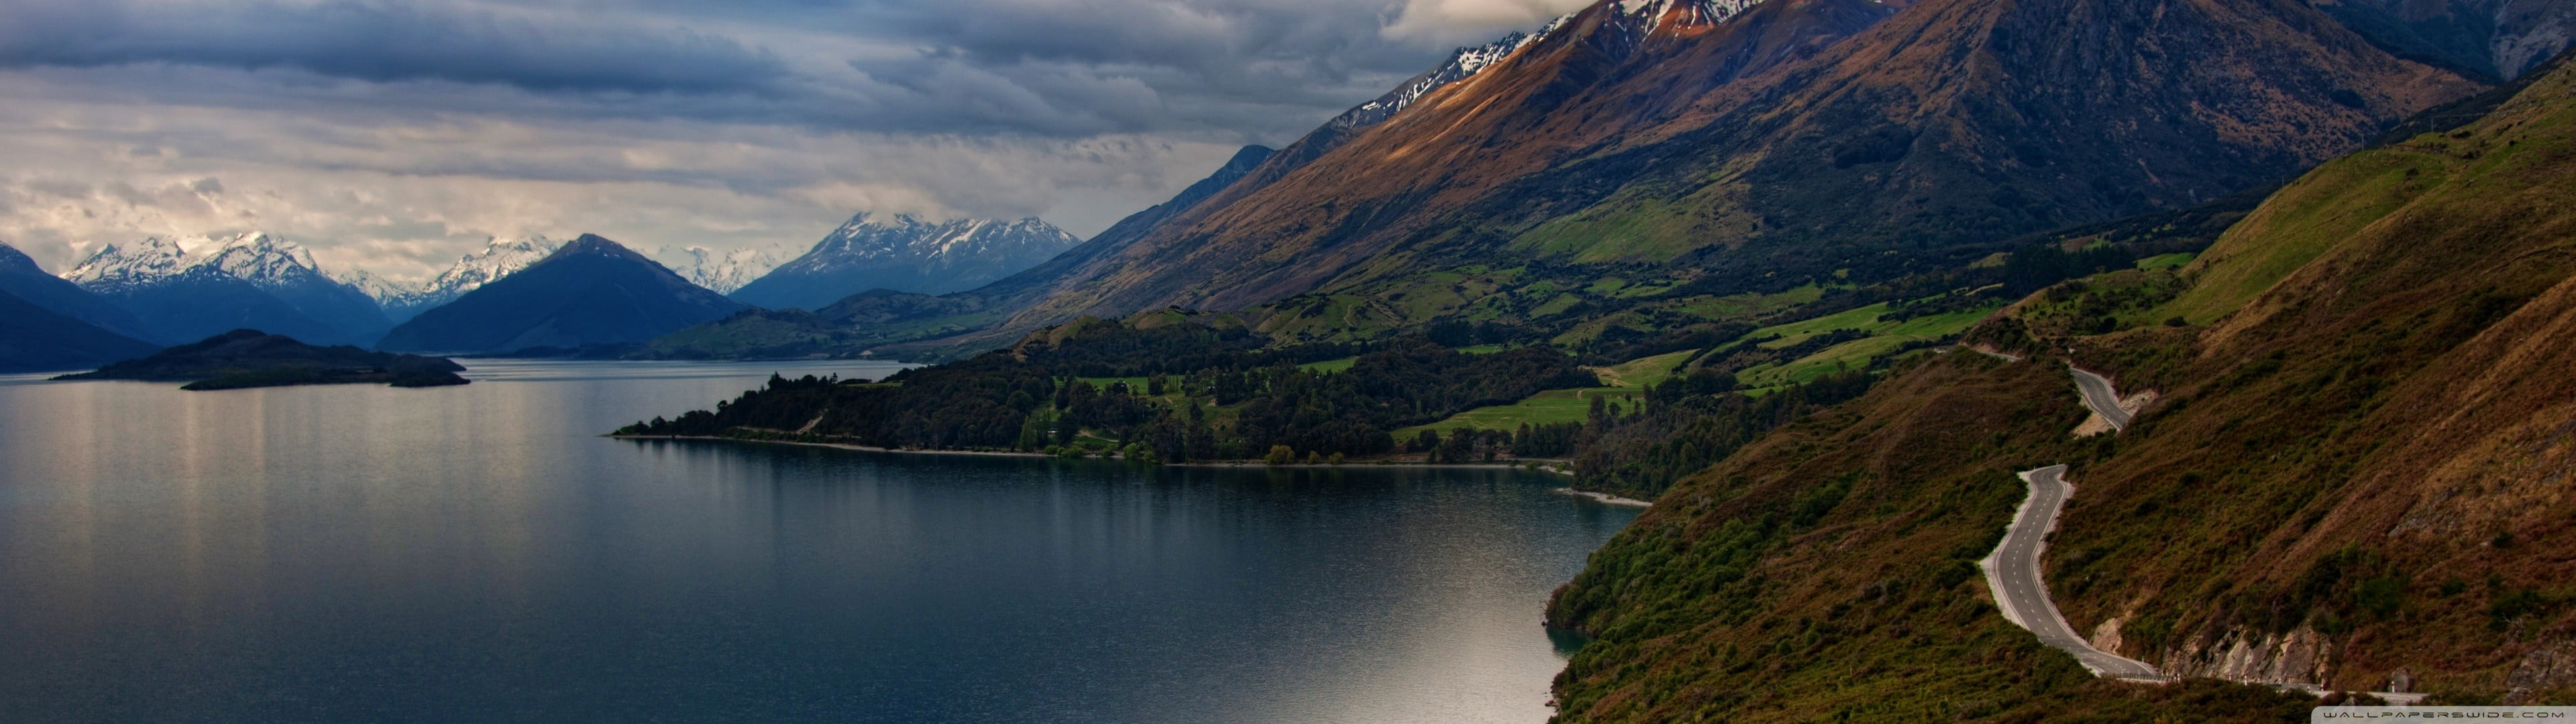 body of water near mountain, New Zealand, mountains, nature, landscape